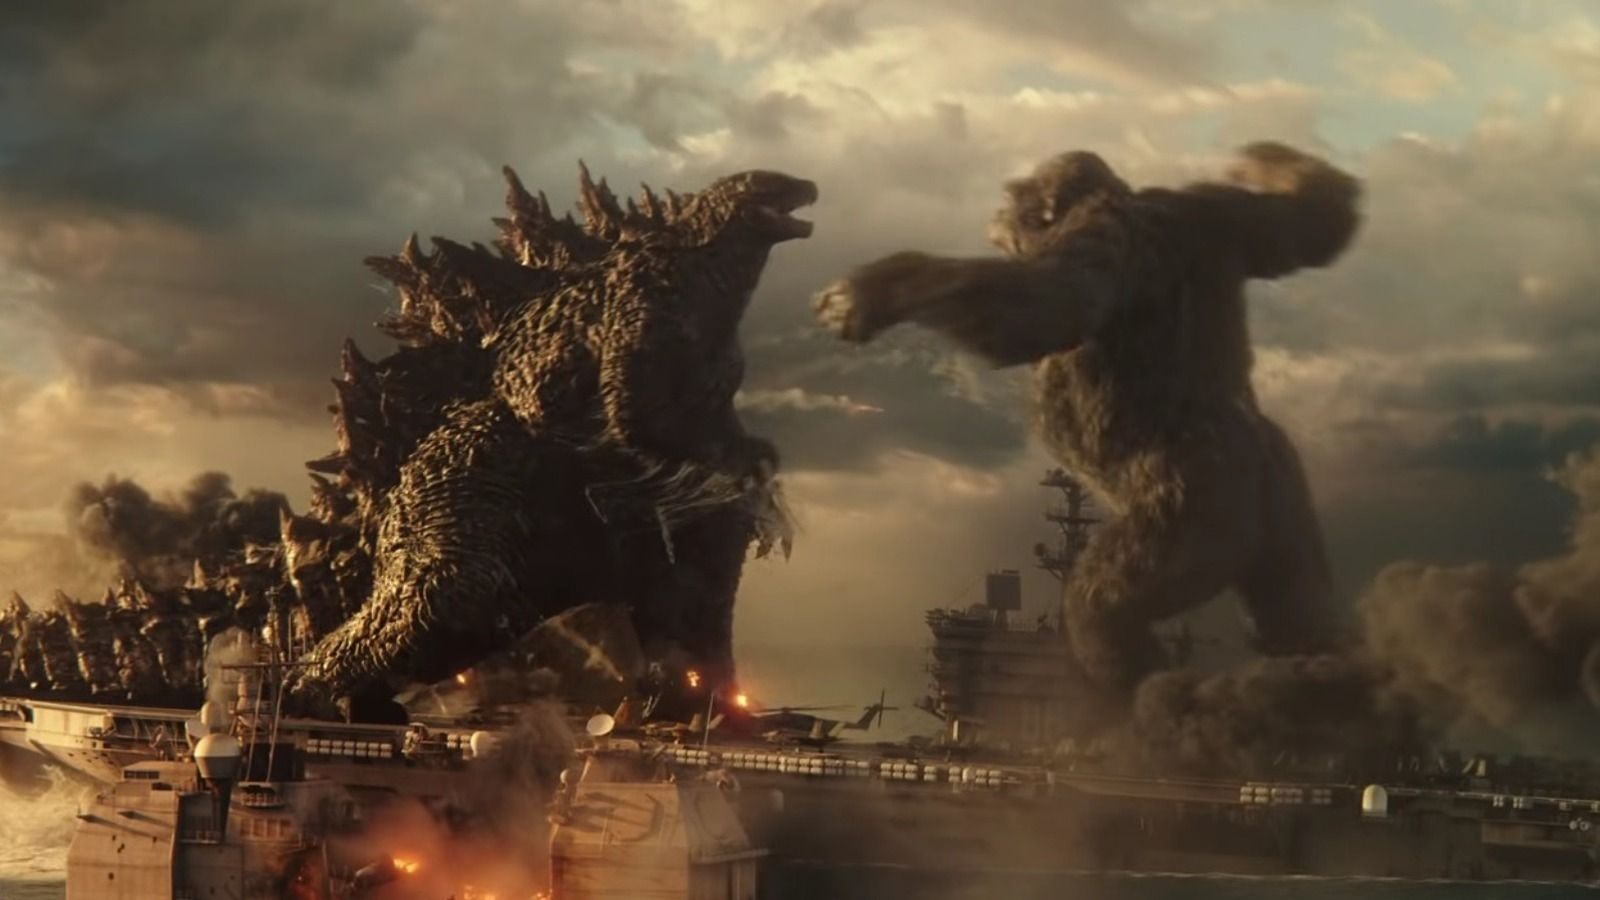 The Report From A Godzilla Vs. Kong Set Visit That's Turning Heads